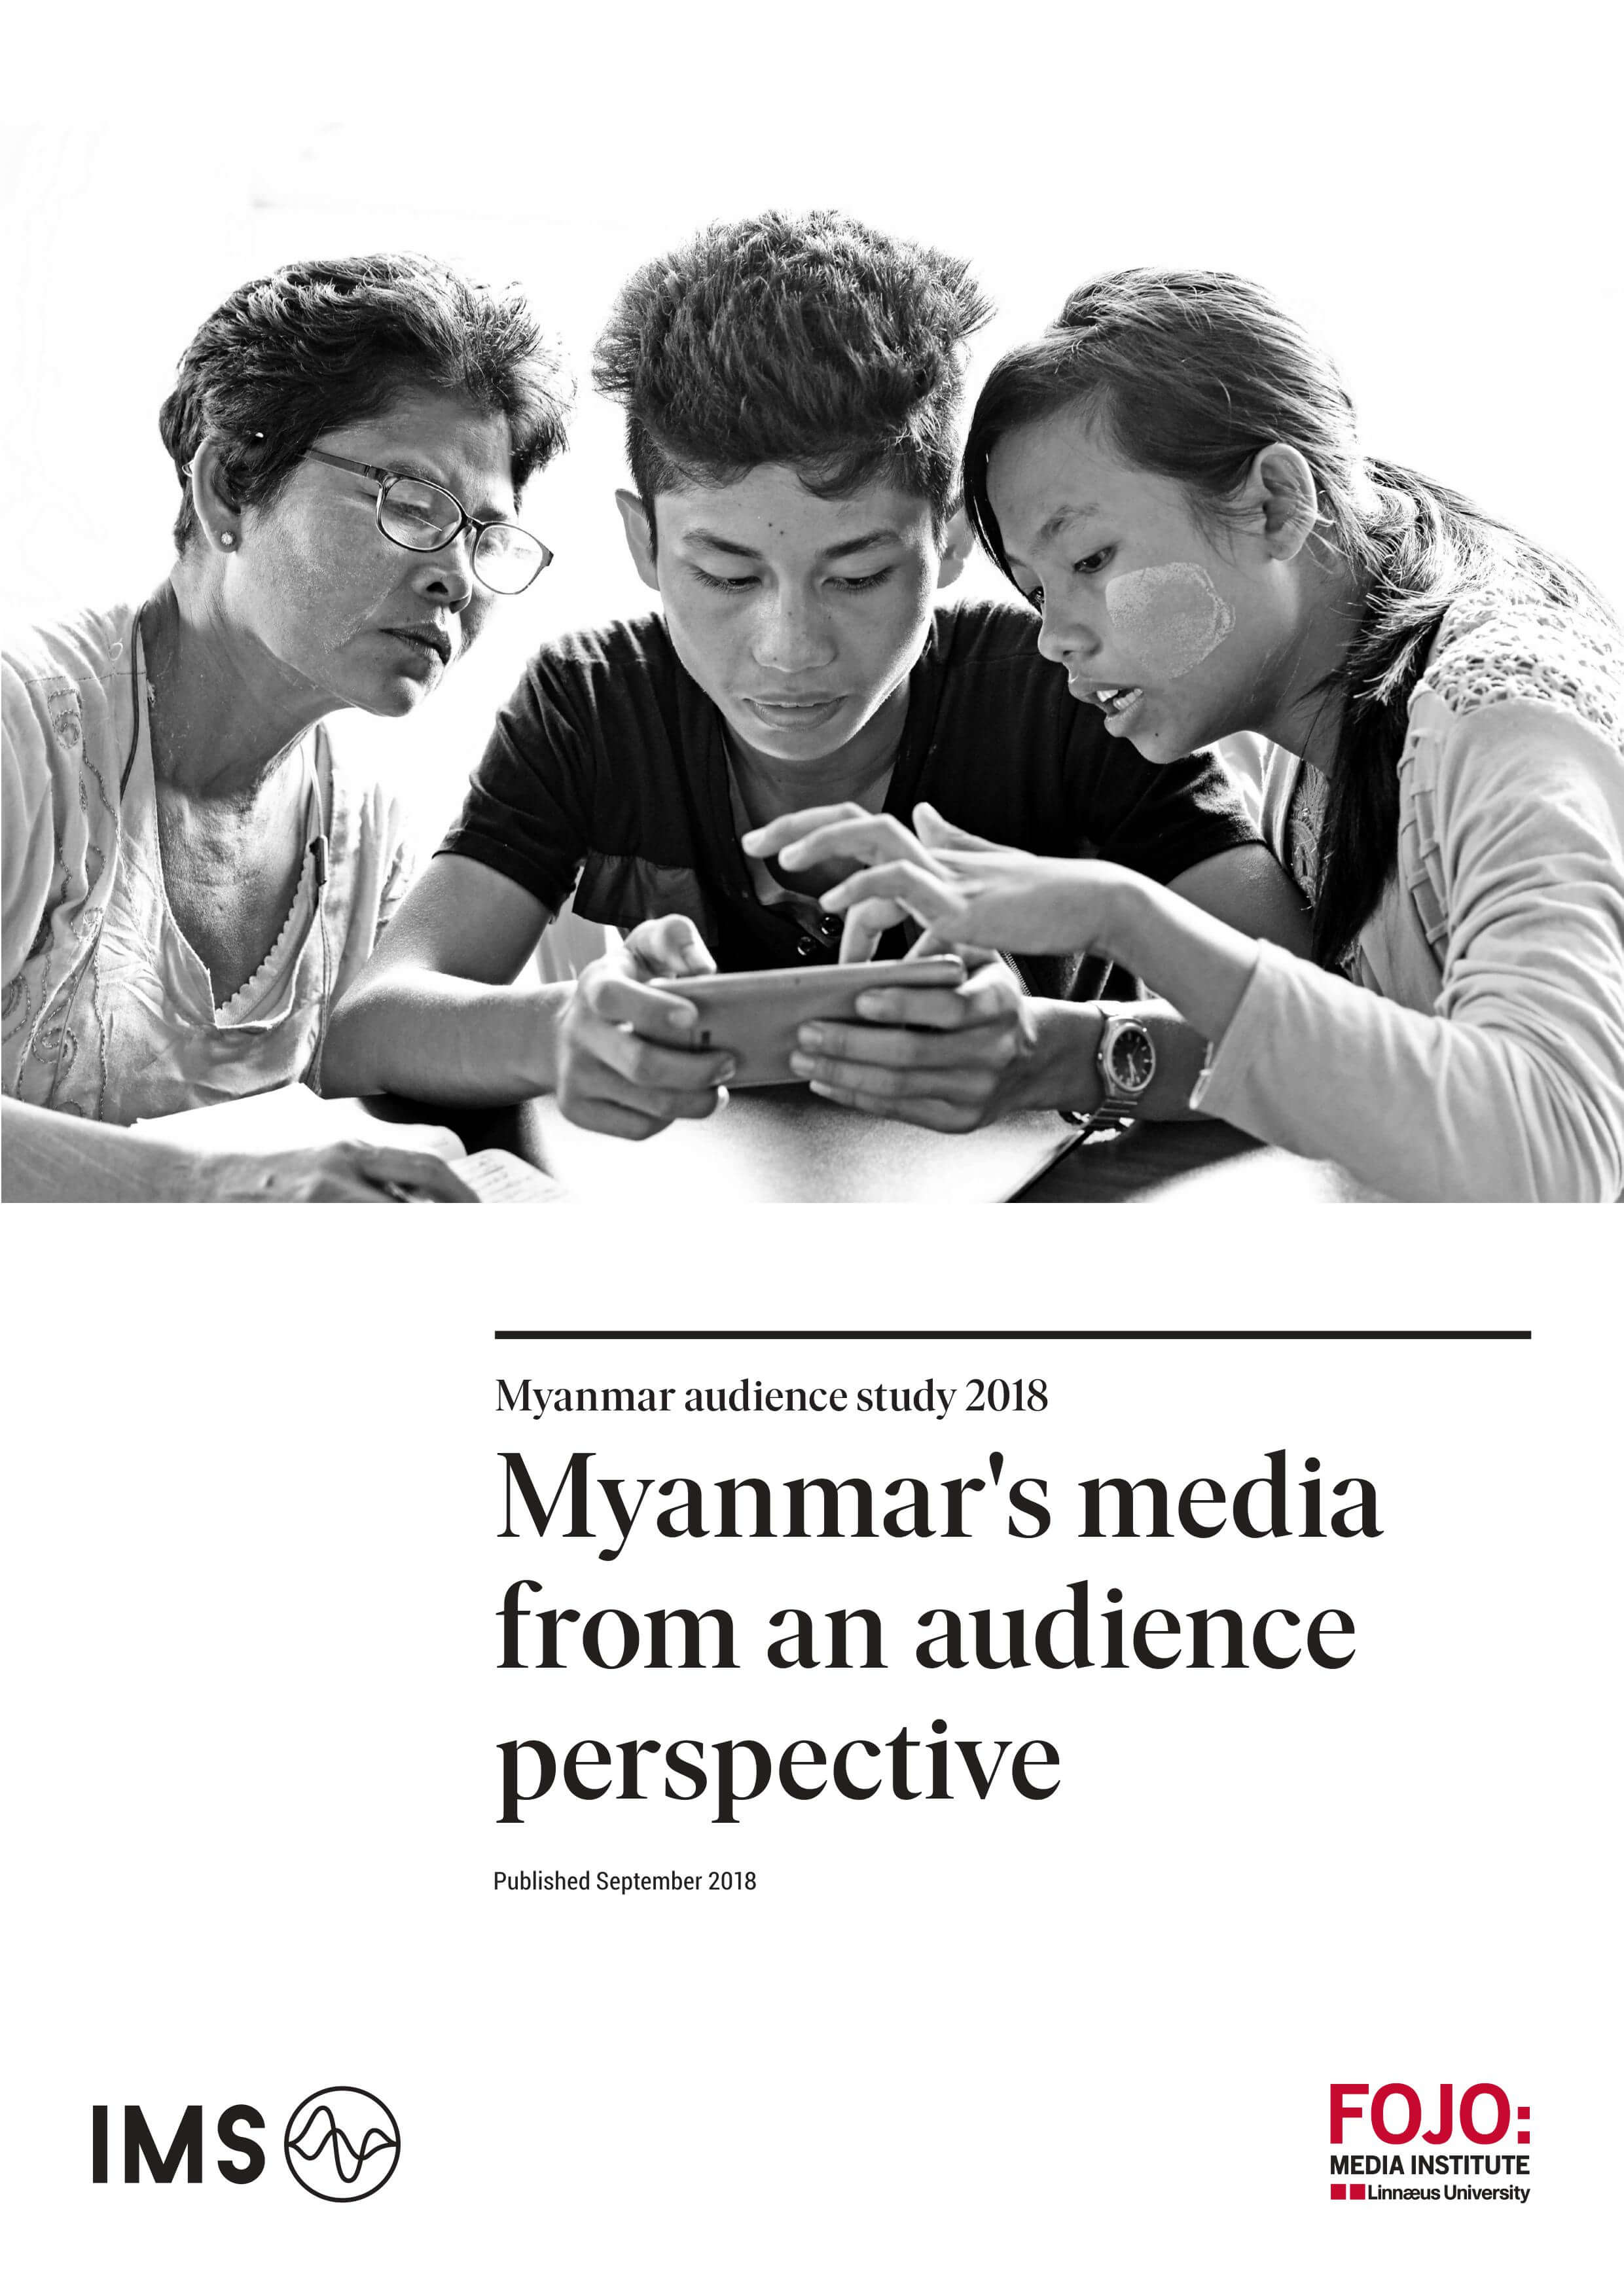 Myanmar's media from an audience perspective